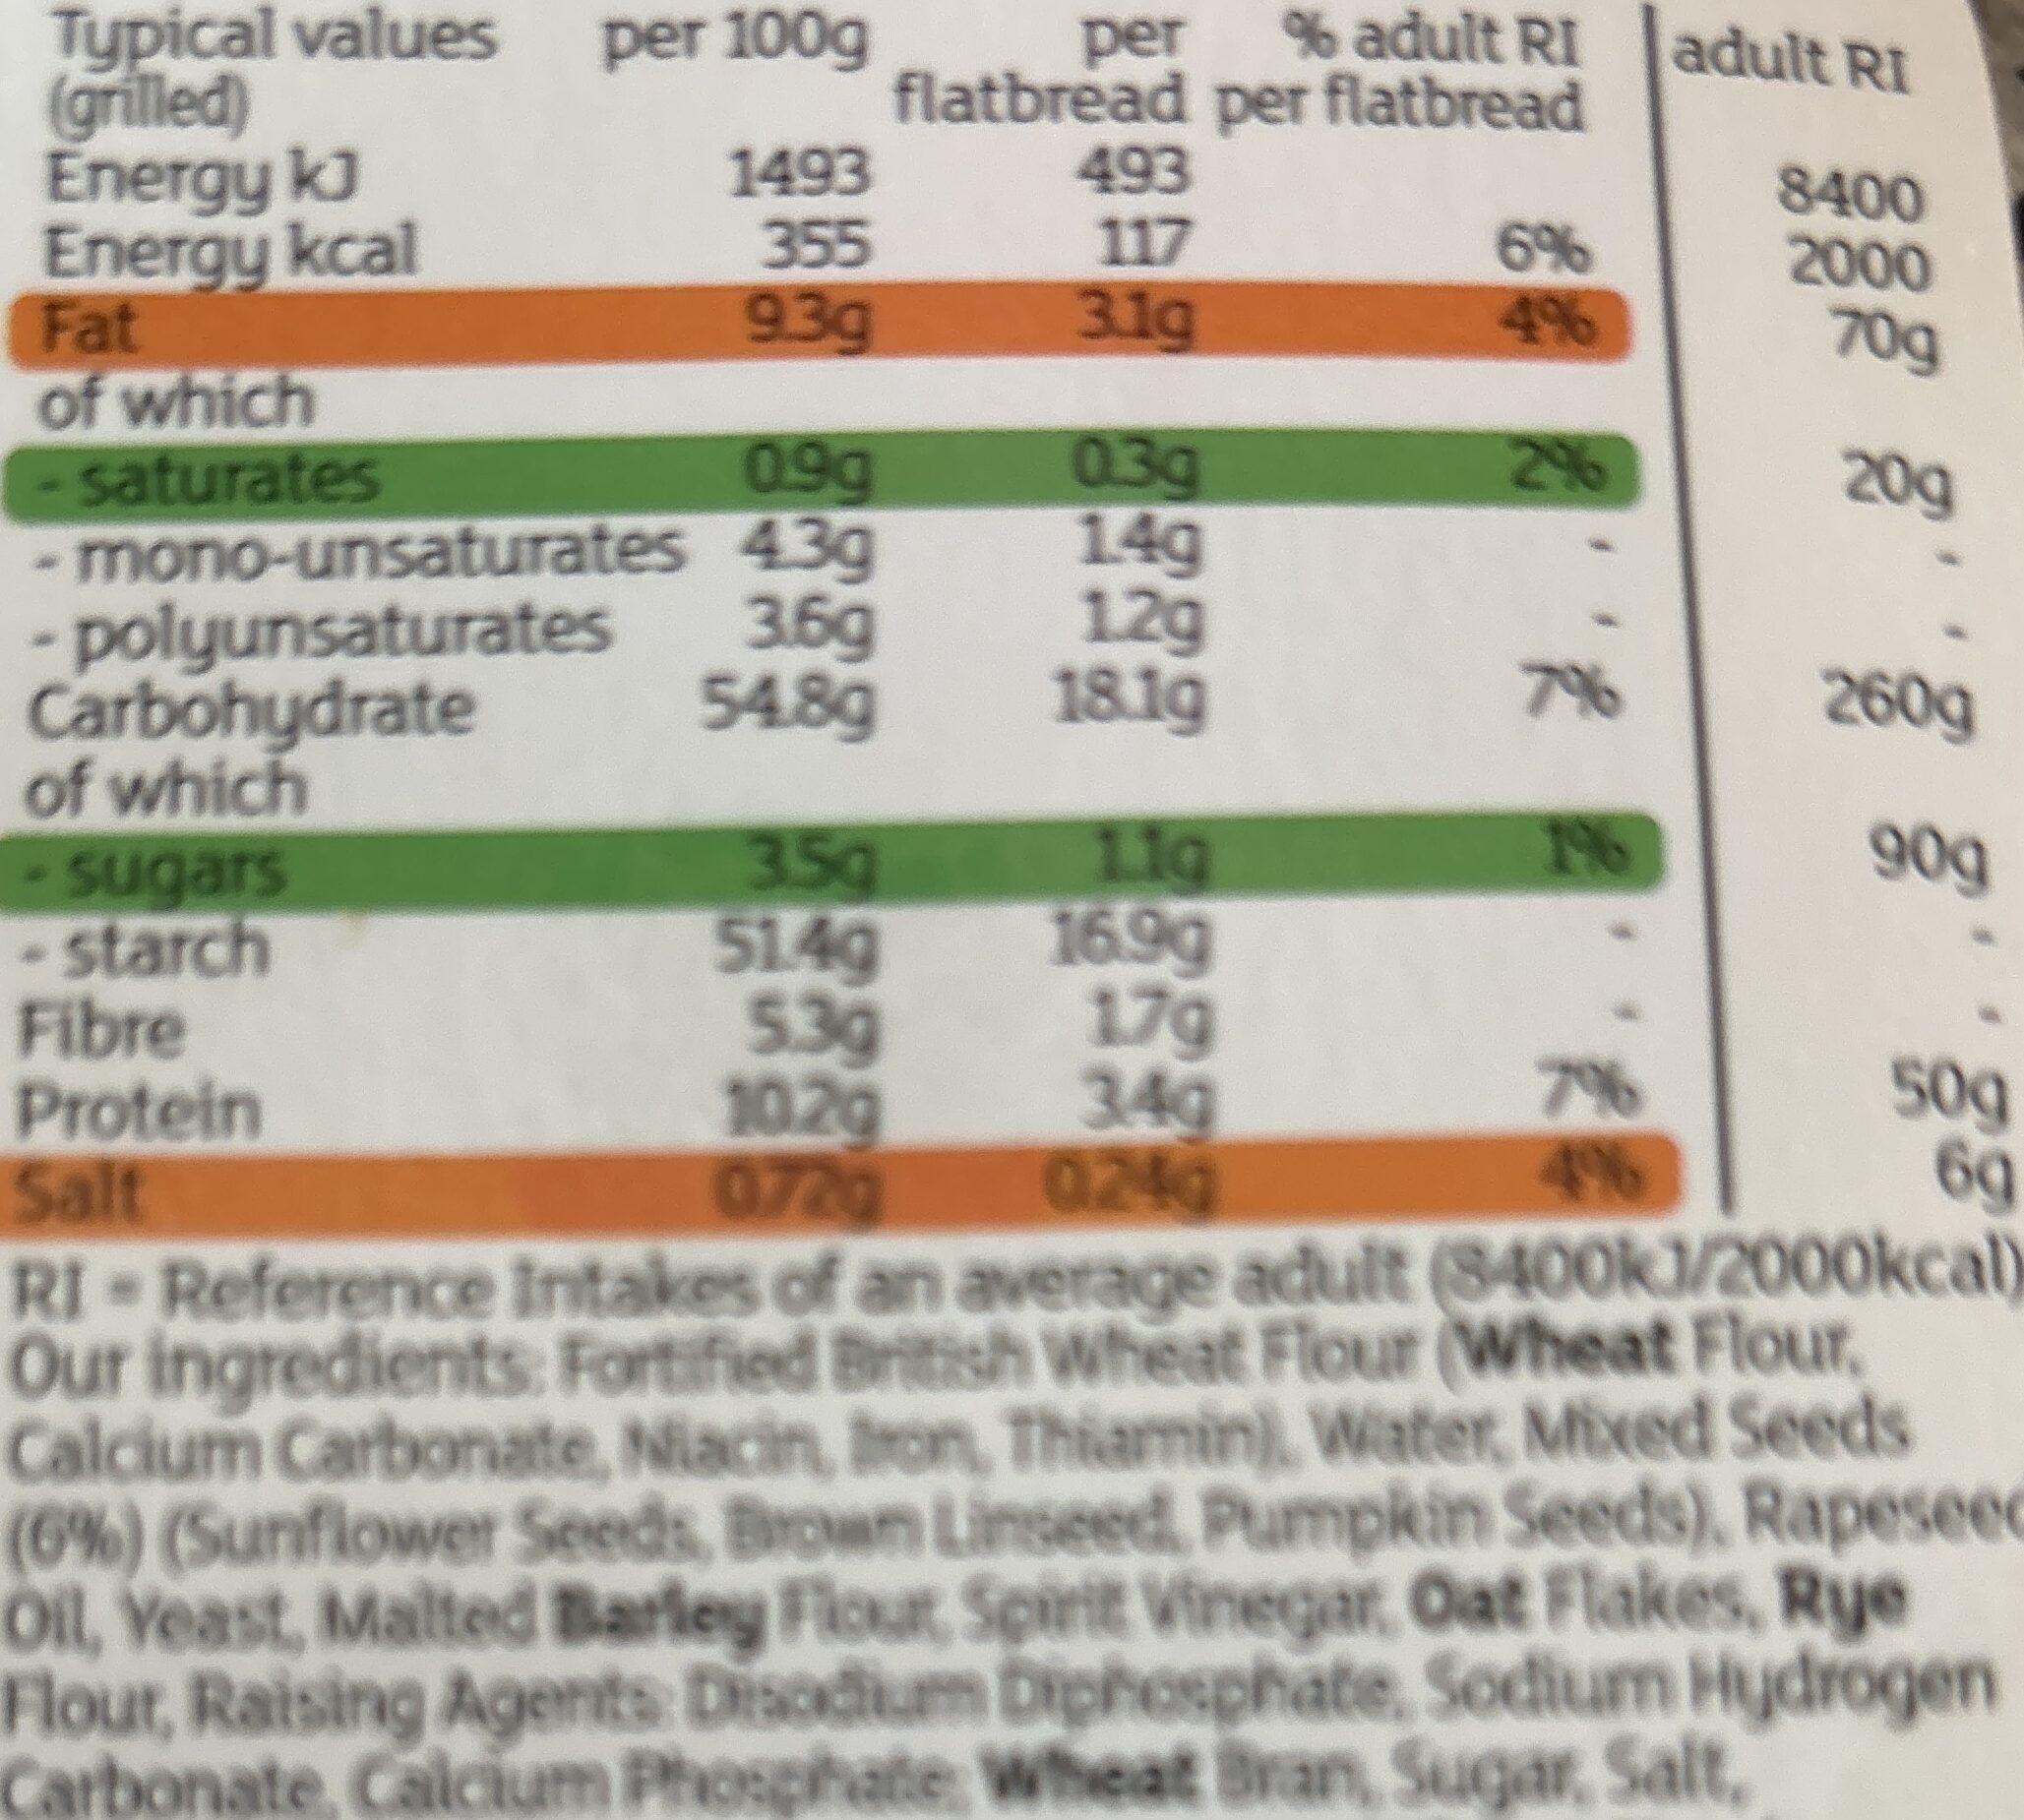 Folded flatbreads - Nutrition facts